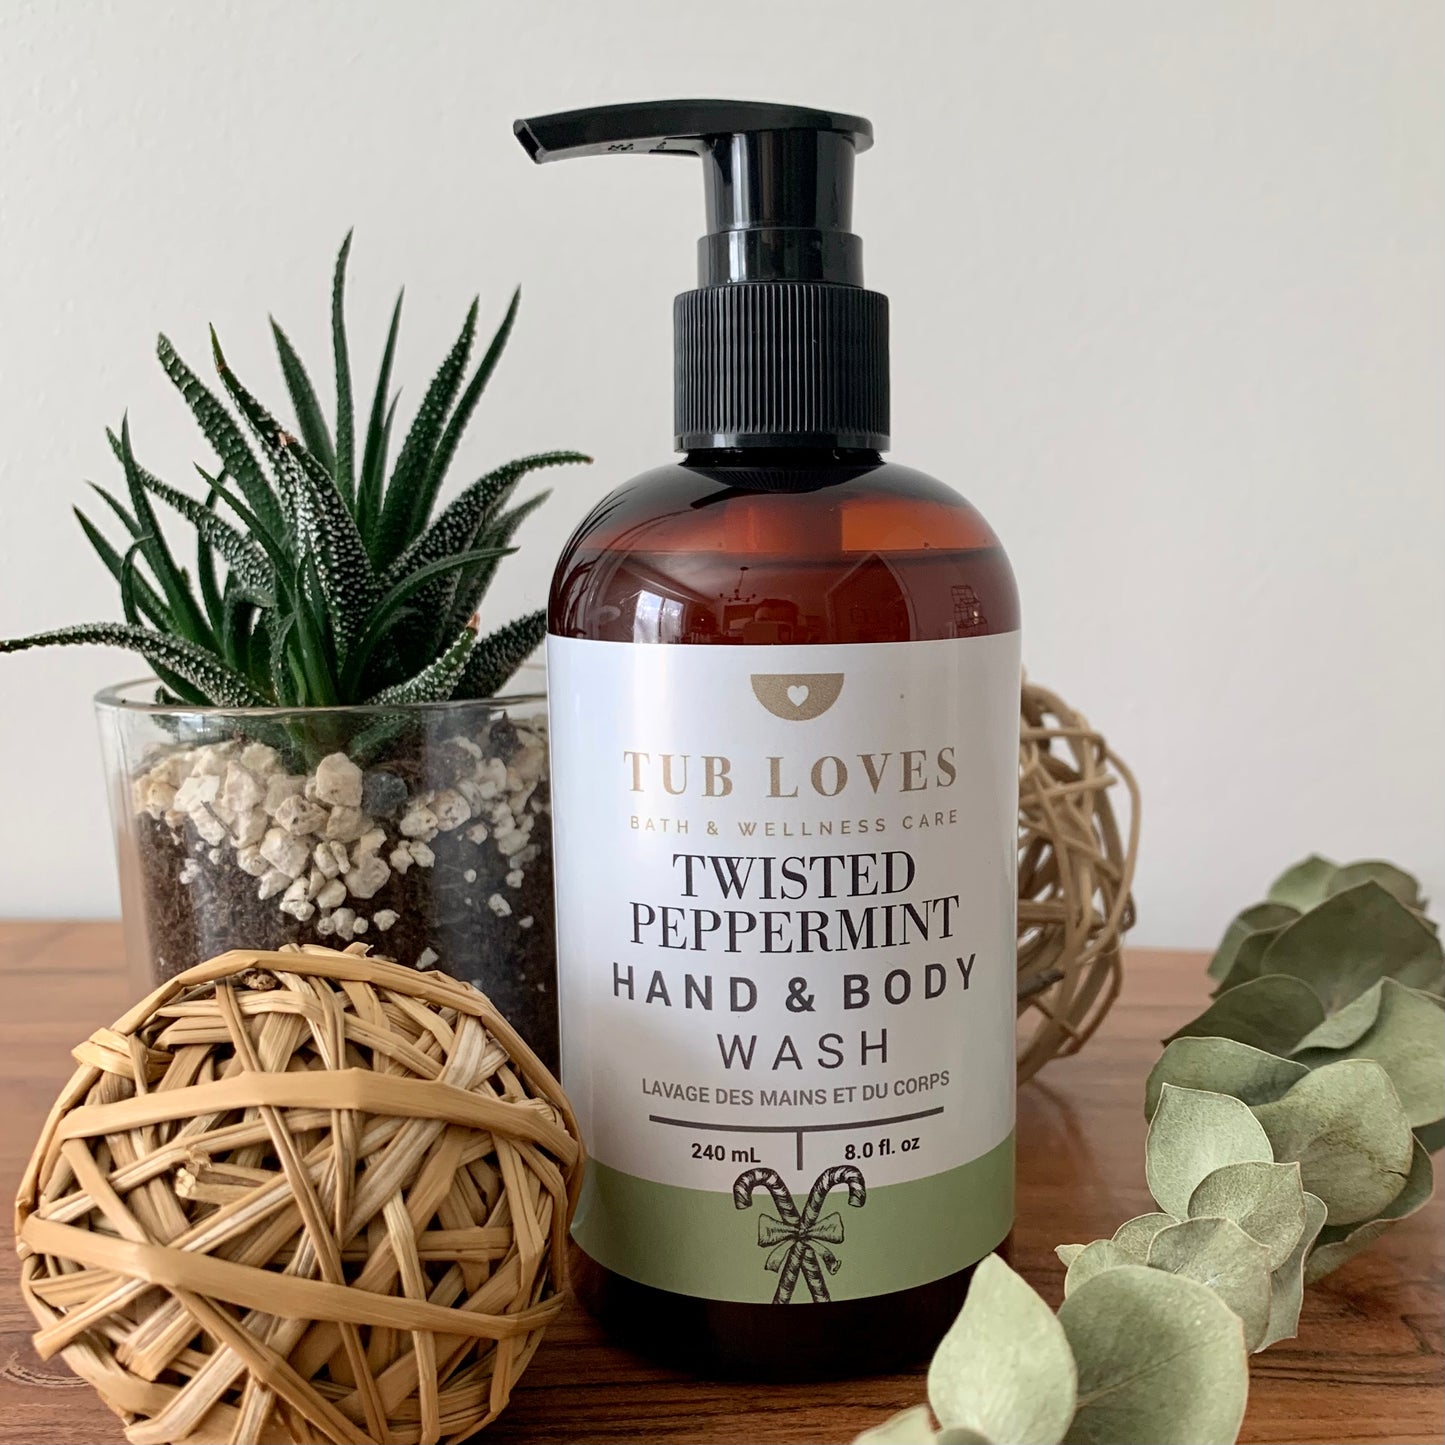 Twisted Peppermint - Hand and Body Wash - Tub Loves